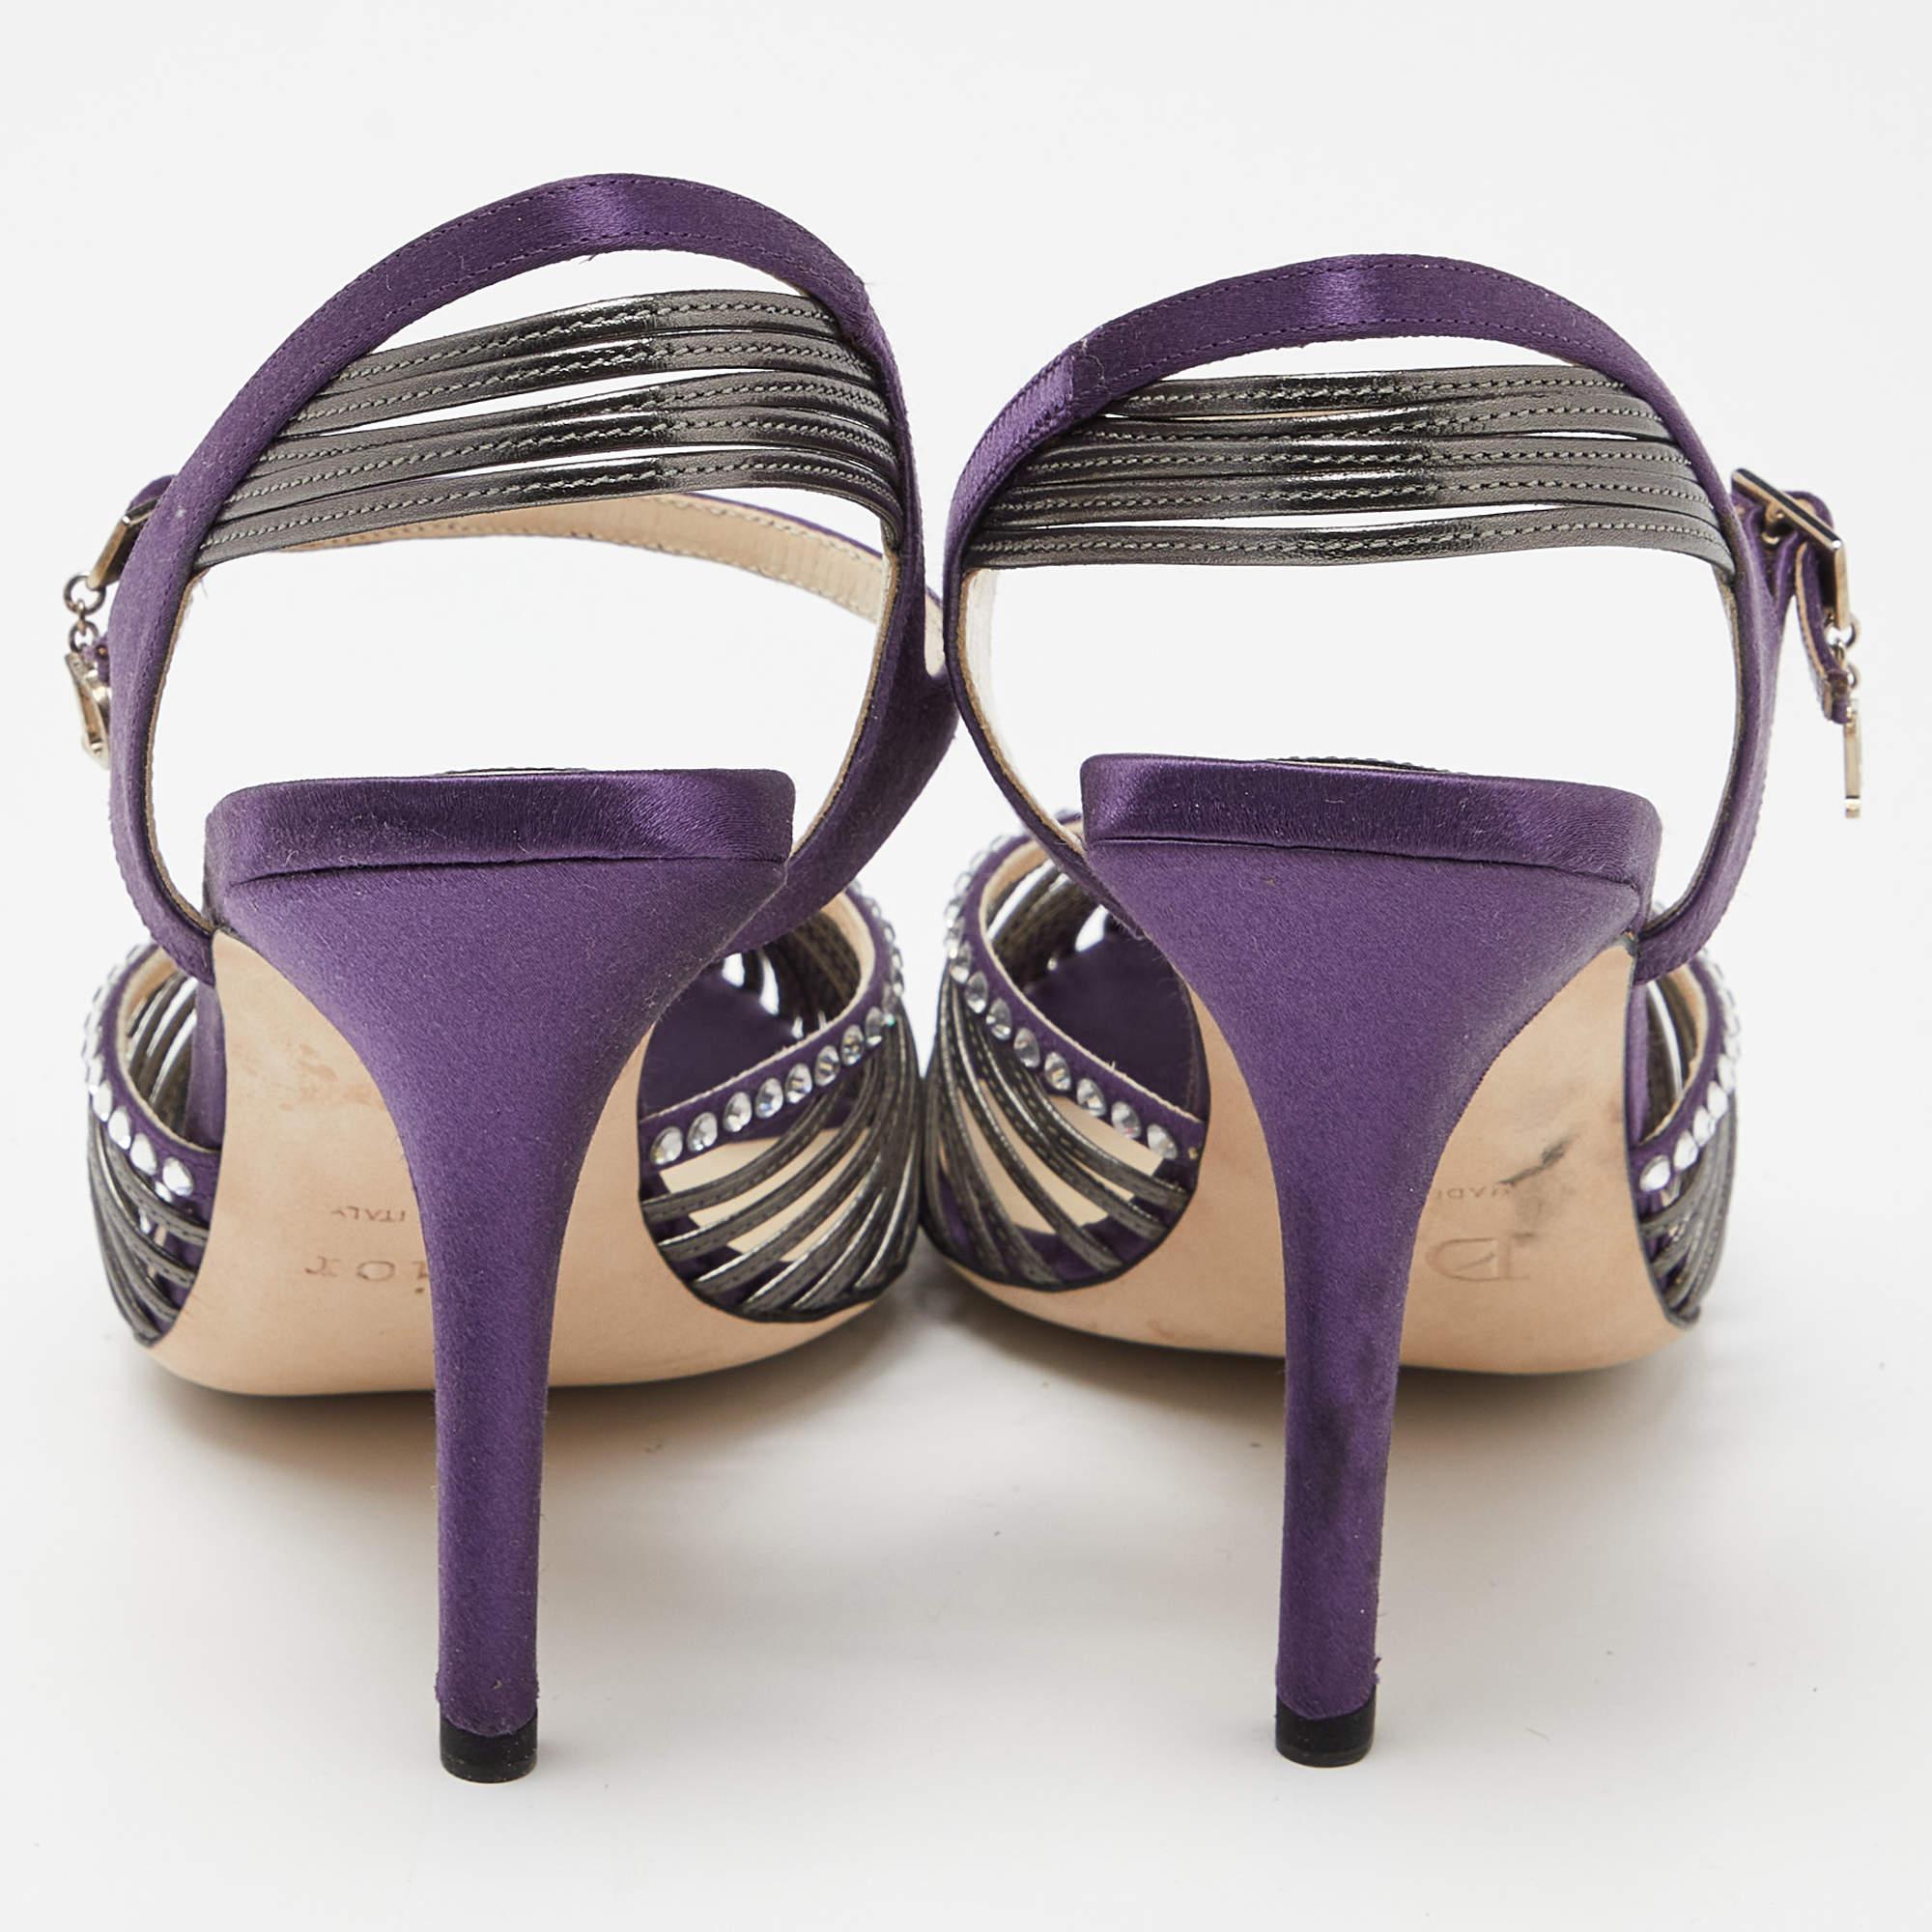 Dior Purple/Grey Satin and Leather Strappy Ankle Strap Sandals Size 38 1